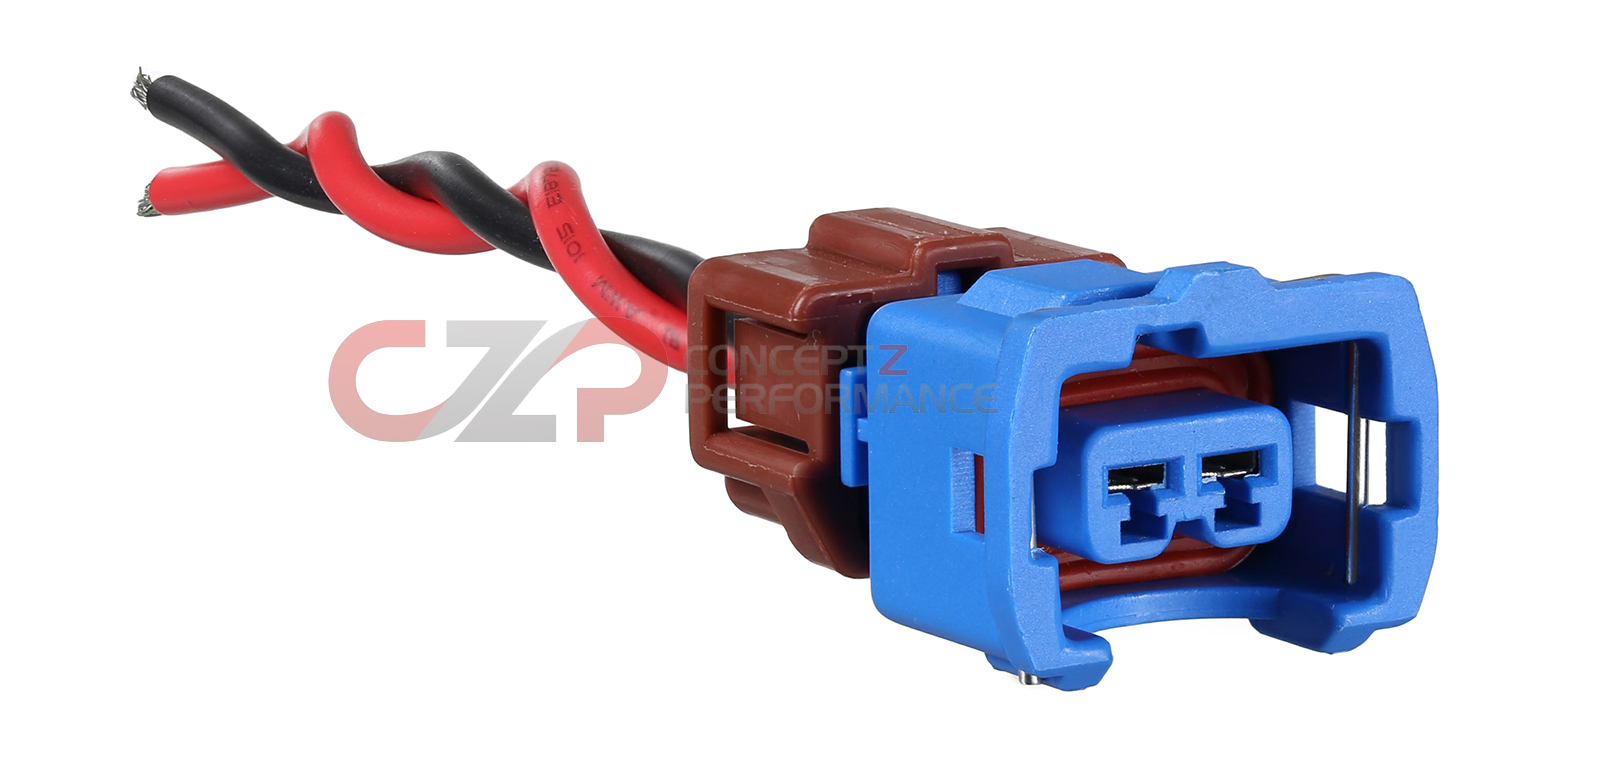 CZP Fast Idle Control Device (FICD) & Air Regulator IACV Connector w/ Pigtails - Nissan 300ZX 90-96 Z32